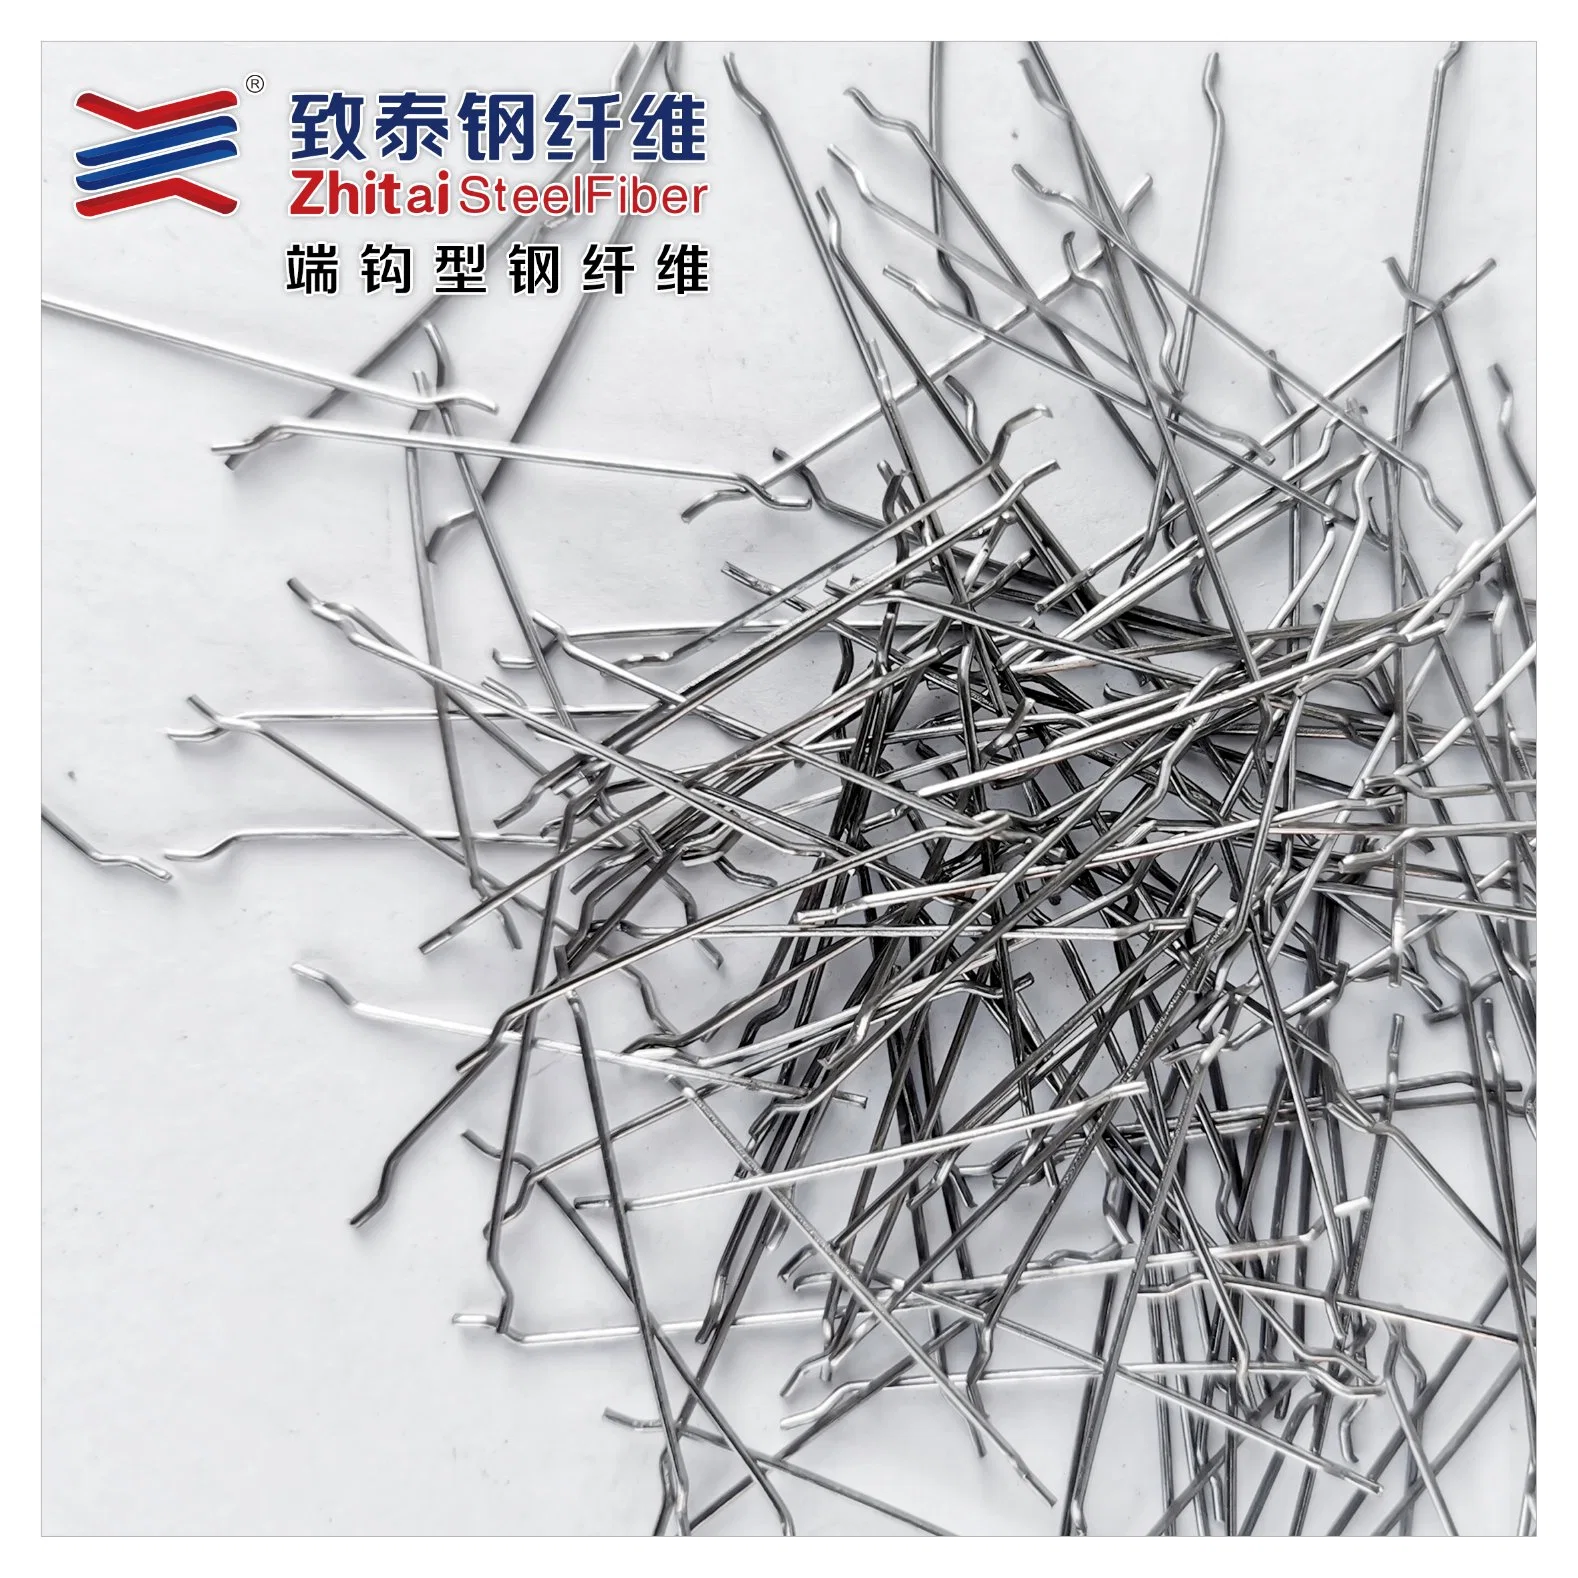 Hooked End Steel Fiber for Reinforced Concrete 1000 to 2000 MPa